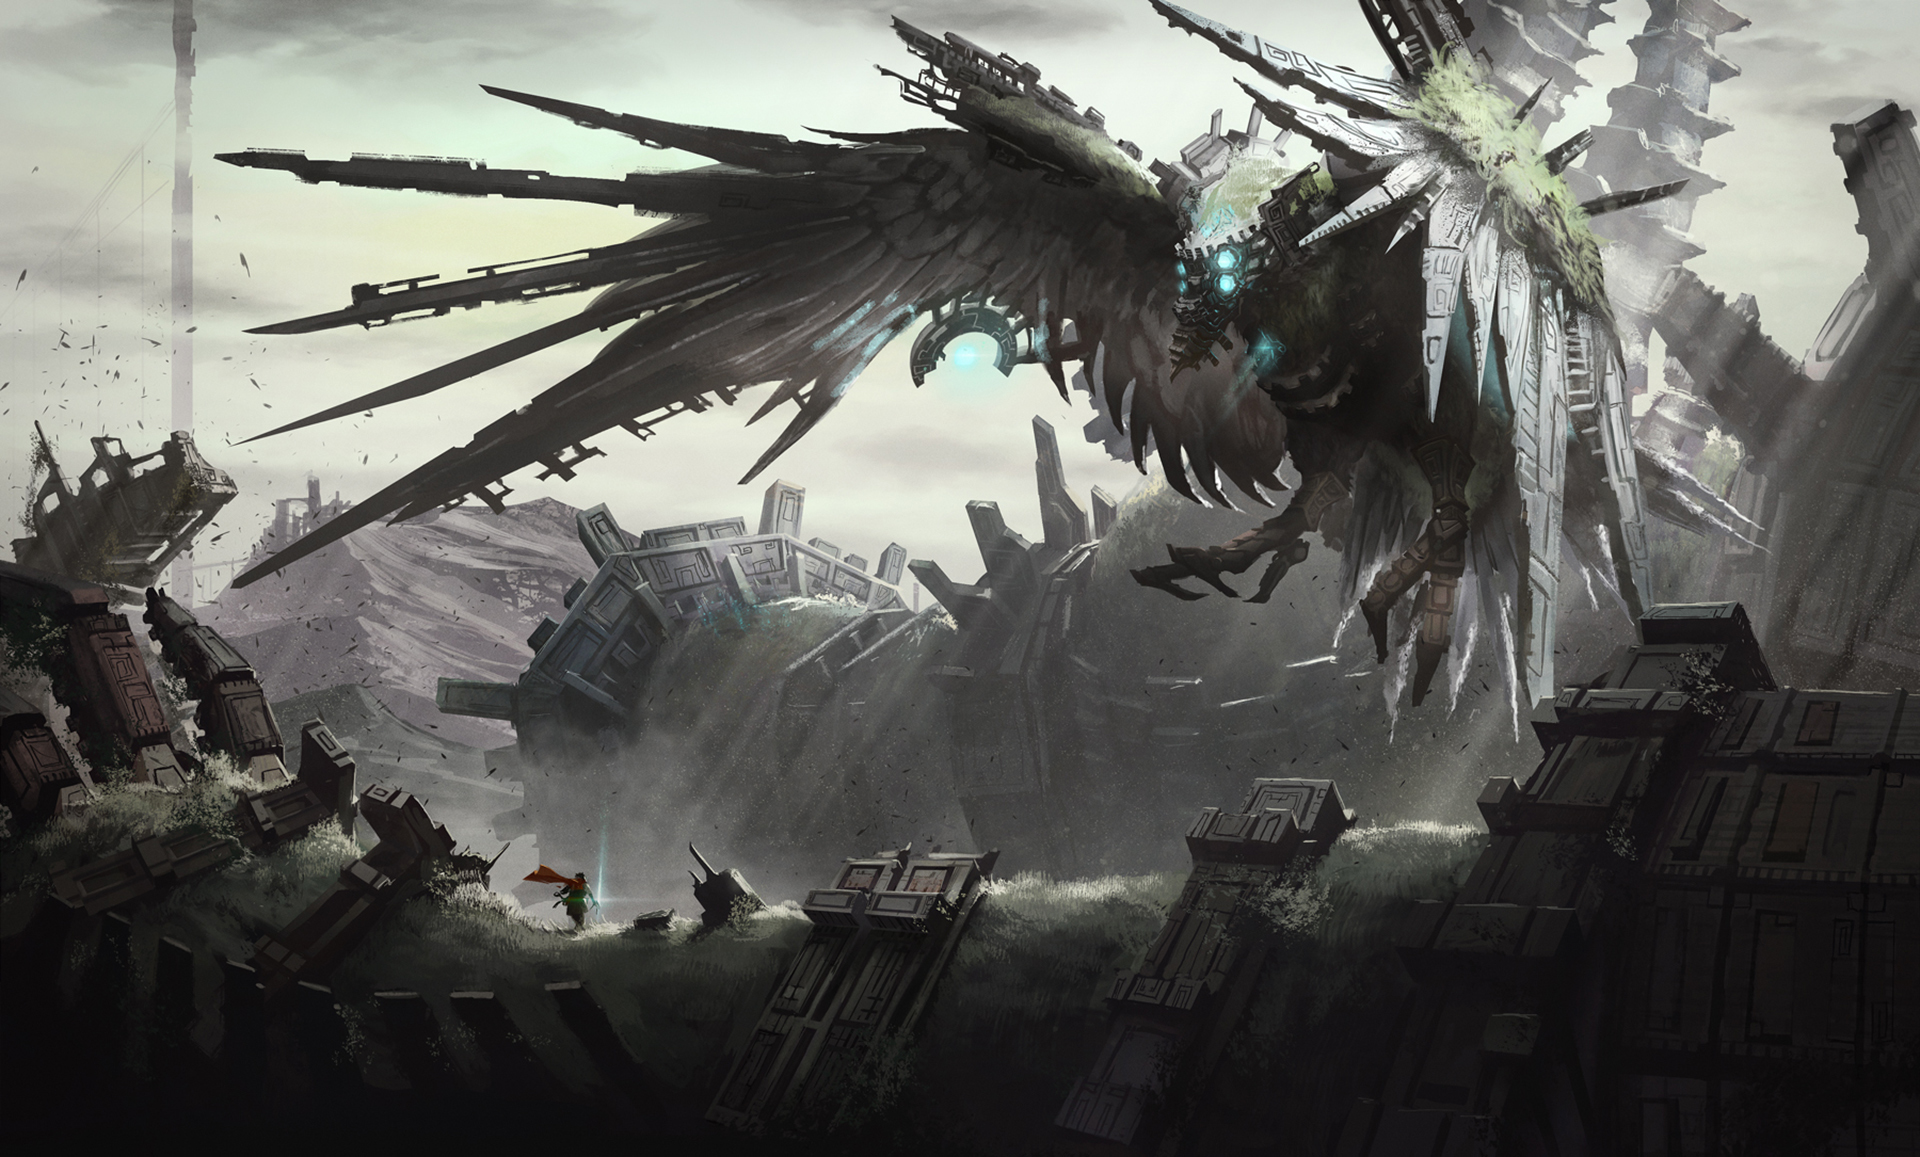 Shadow Of The Colossus HD Wallpaper by Thibault Girard